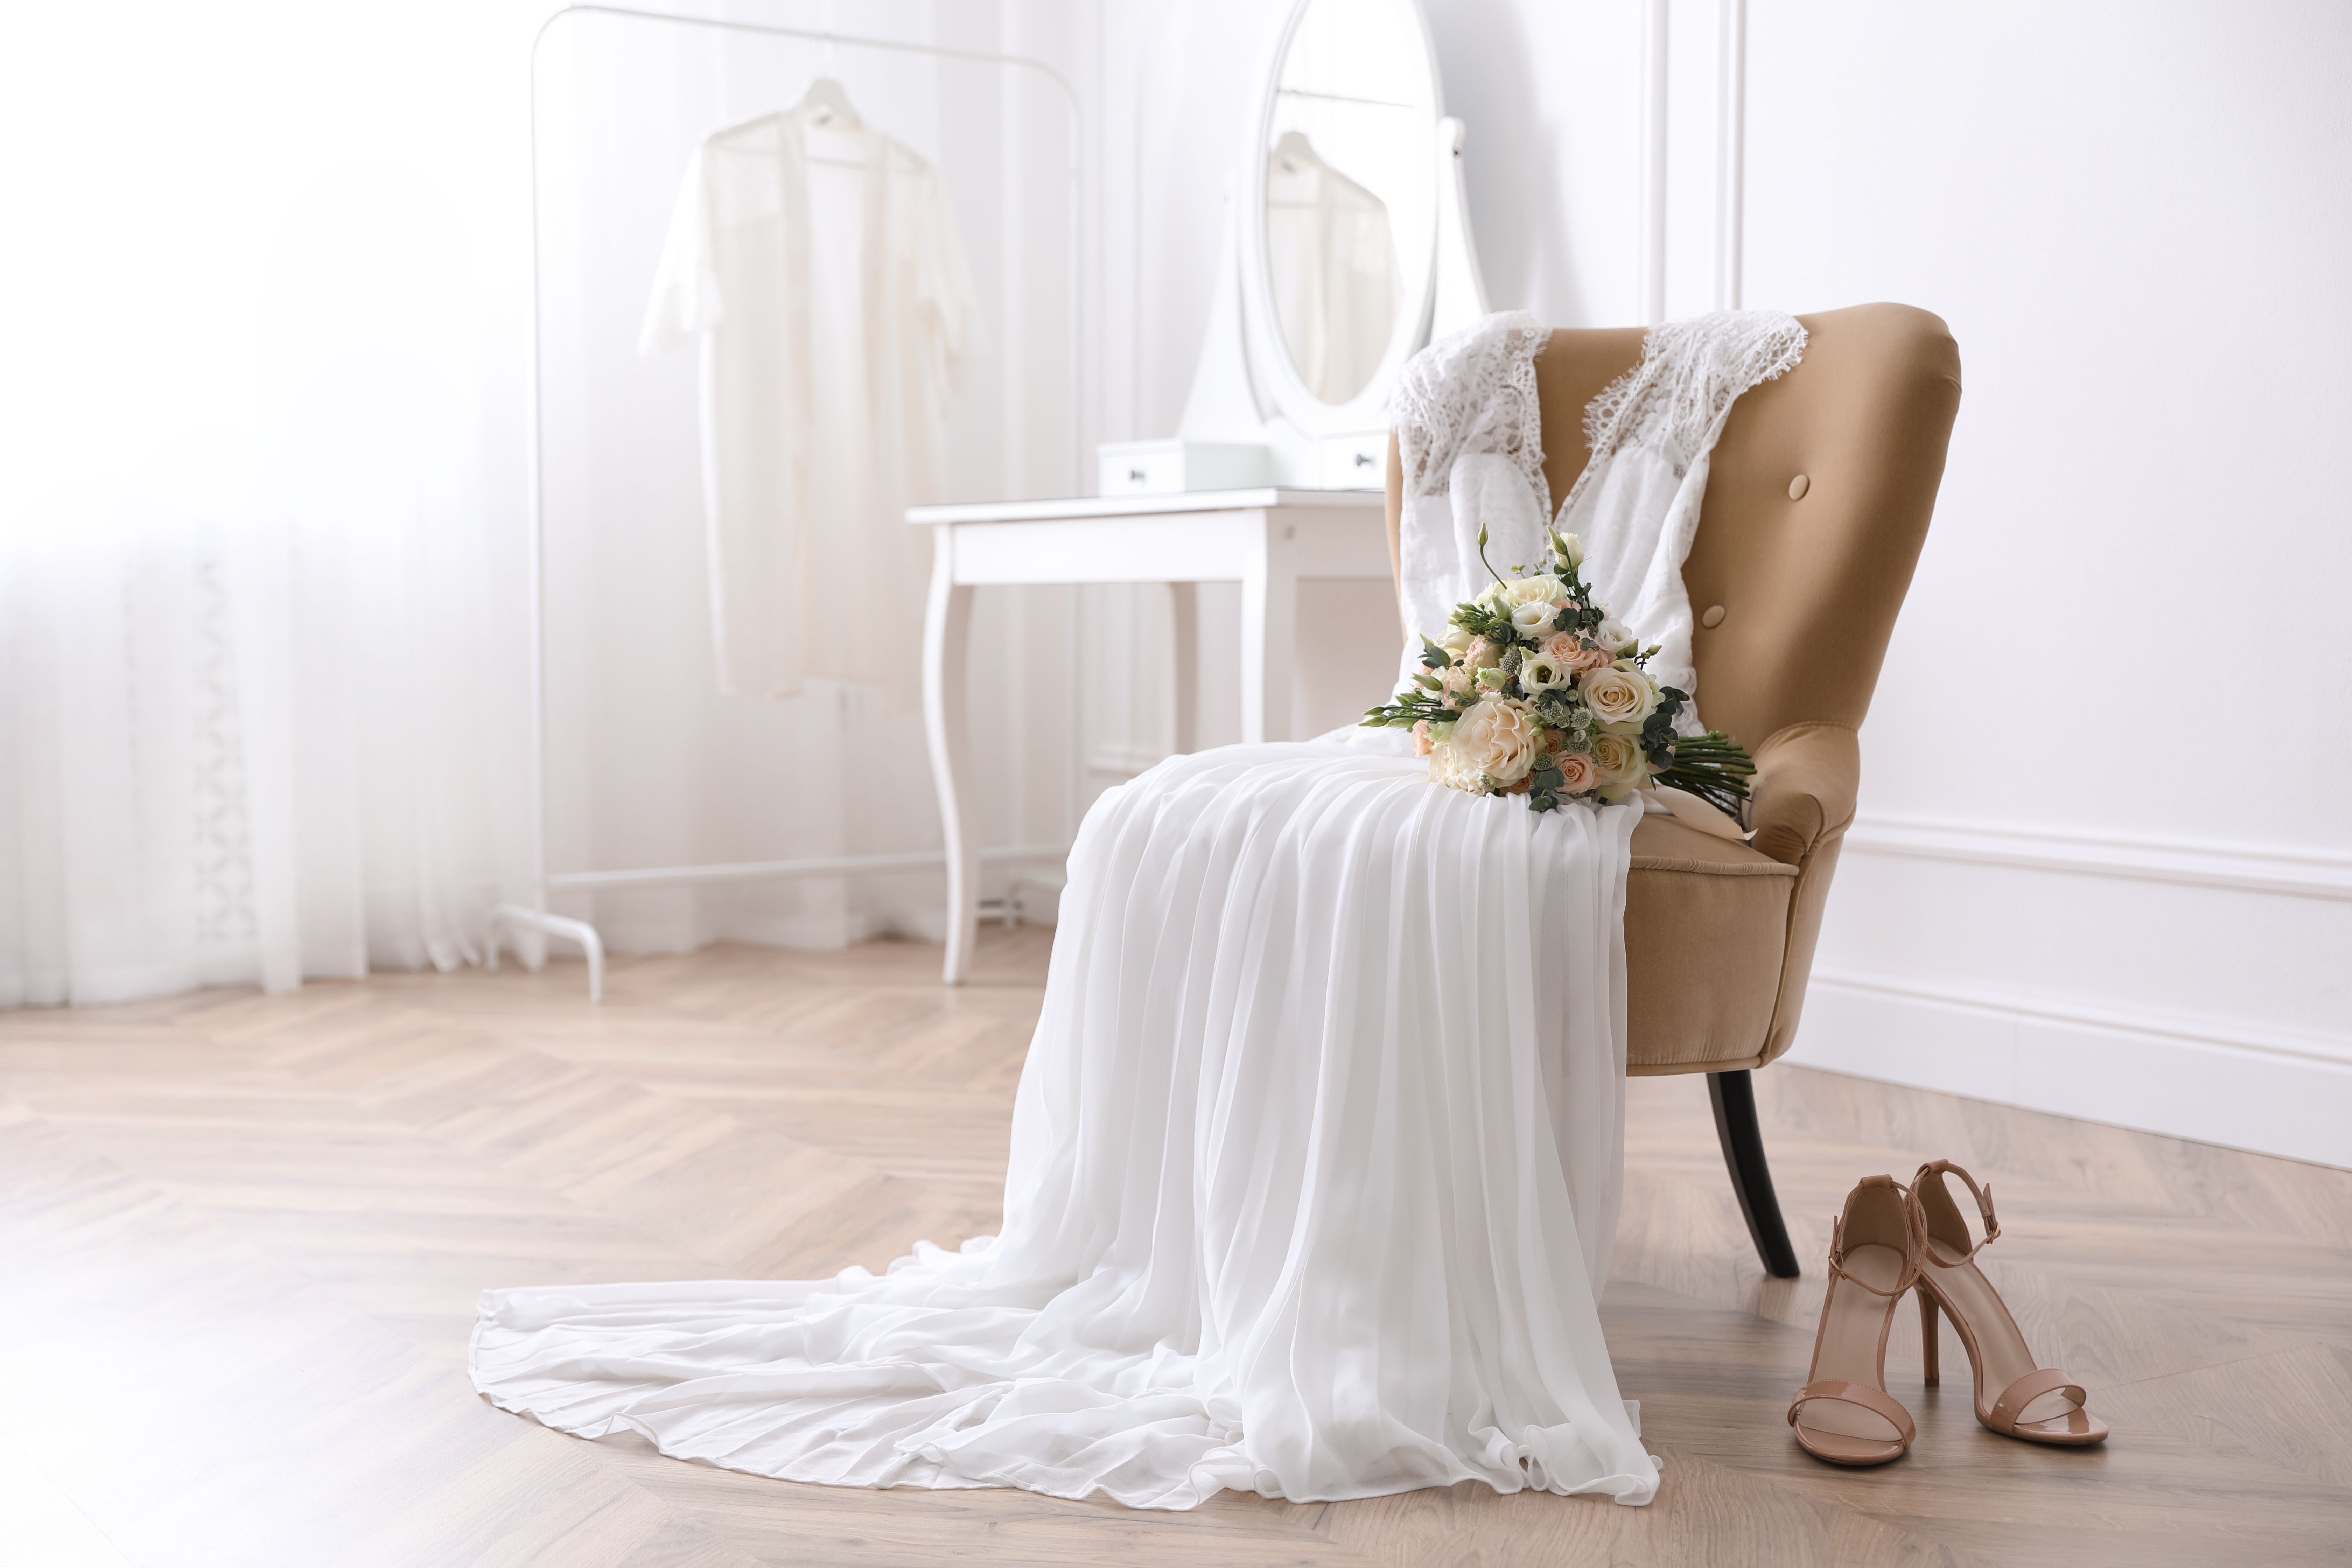 A white wedding gown on a chair with heels on the floor | Source: Shutterstock